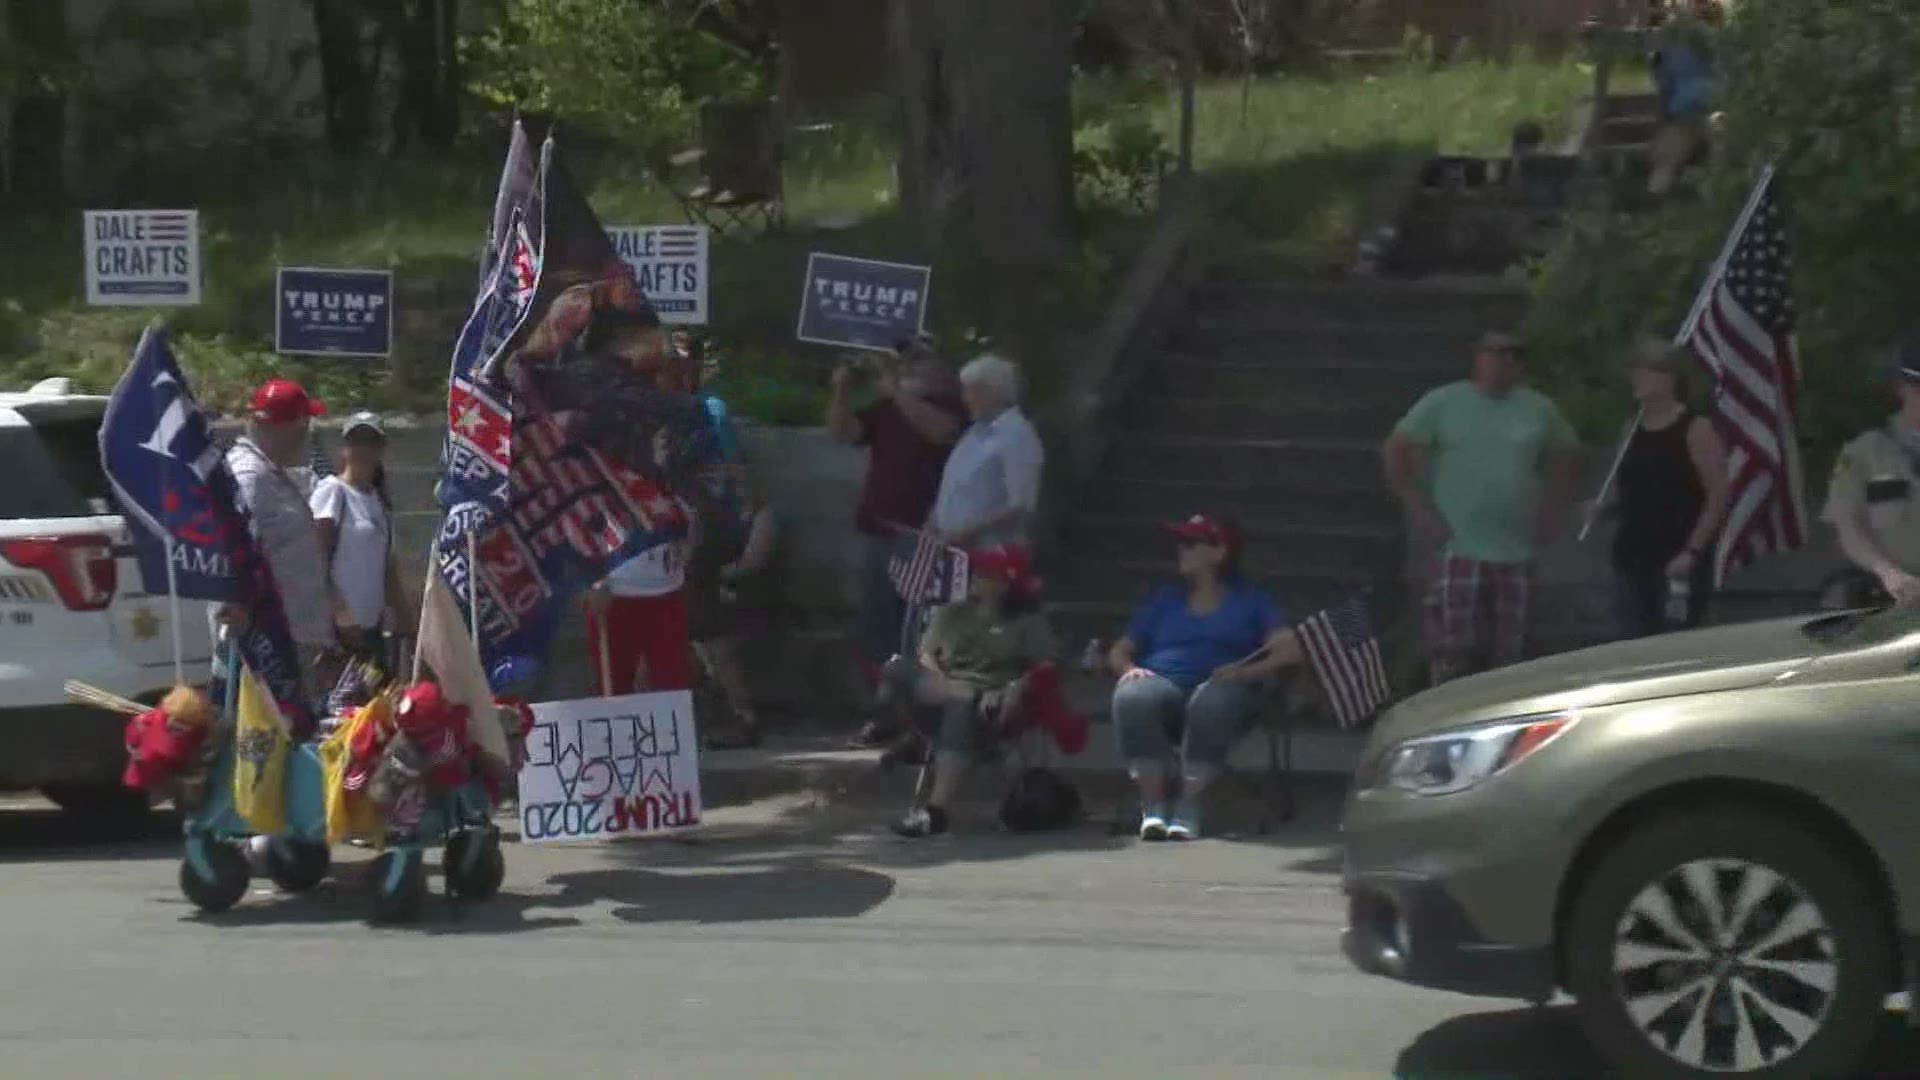 Supporters of President Trump have congregated on the streets of Guilford, excitedly waiting for him to arrive.